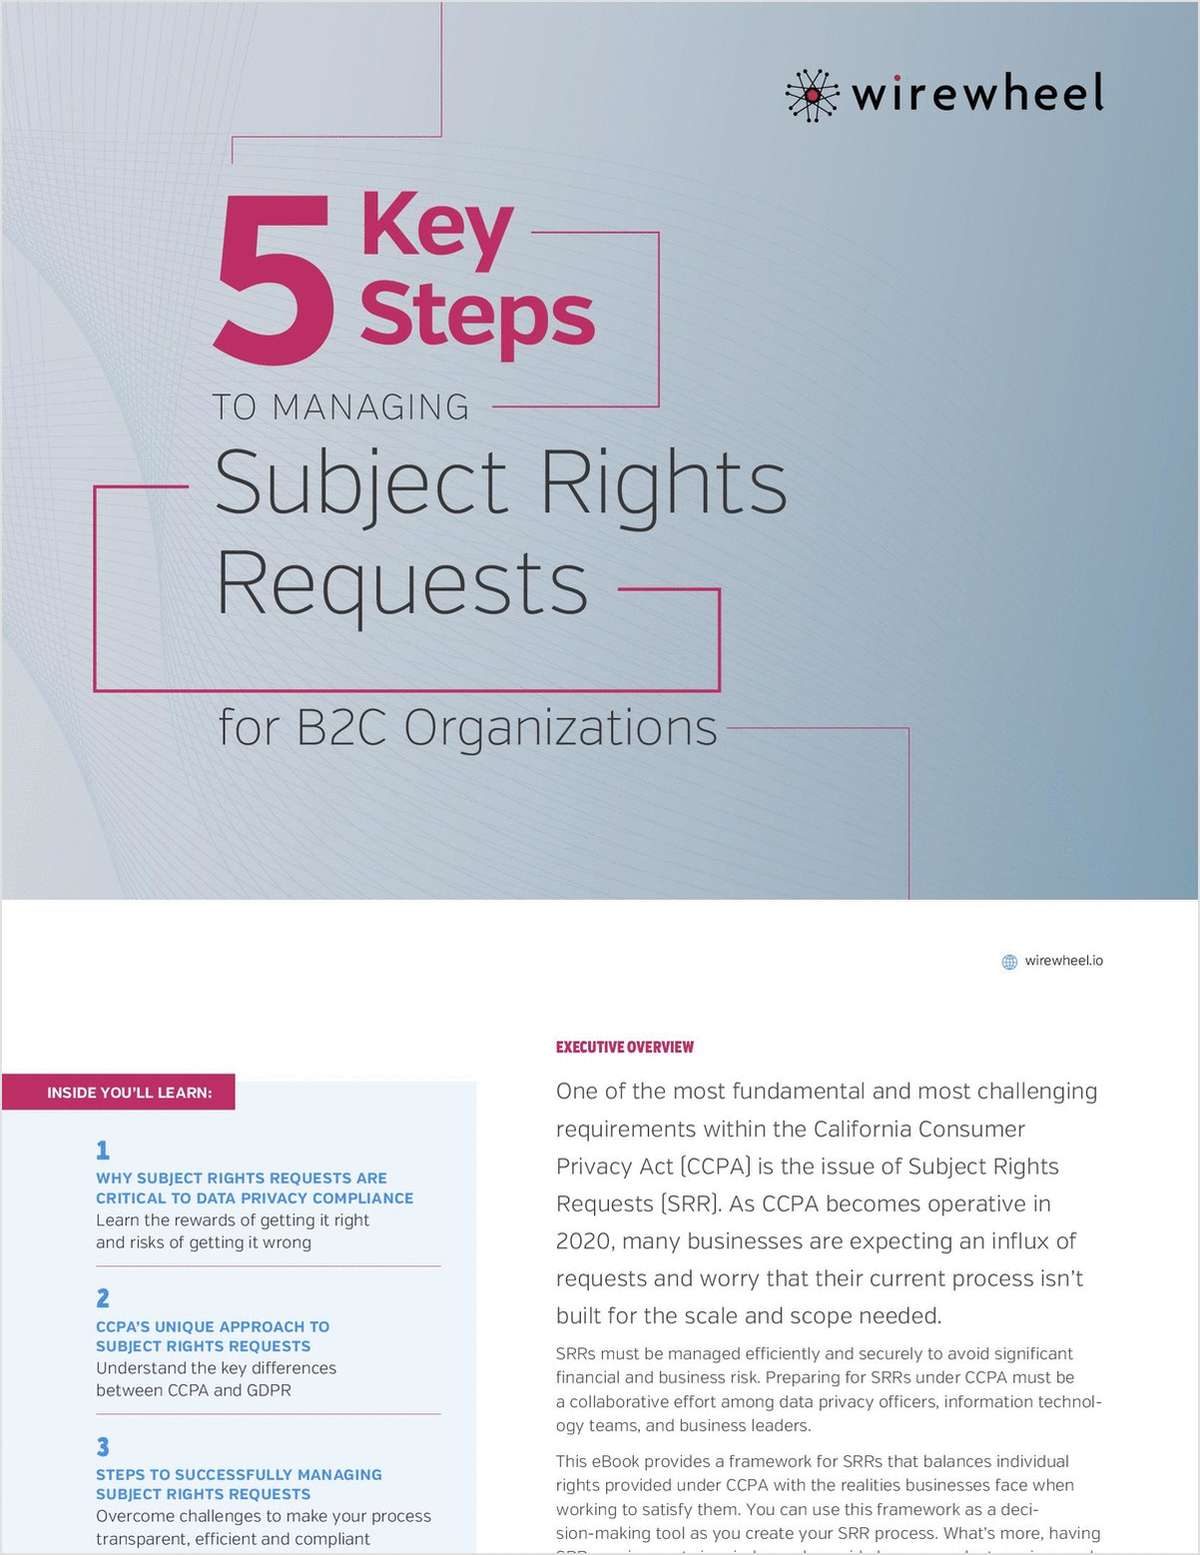 5 Key Steps To Managing Subject Rights Requests for B2C Organizations